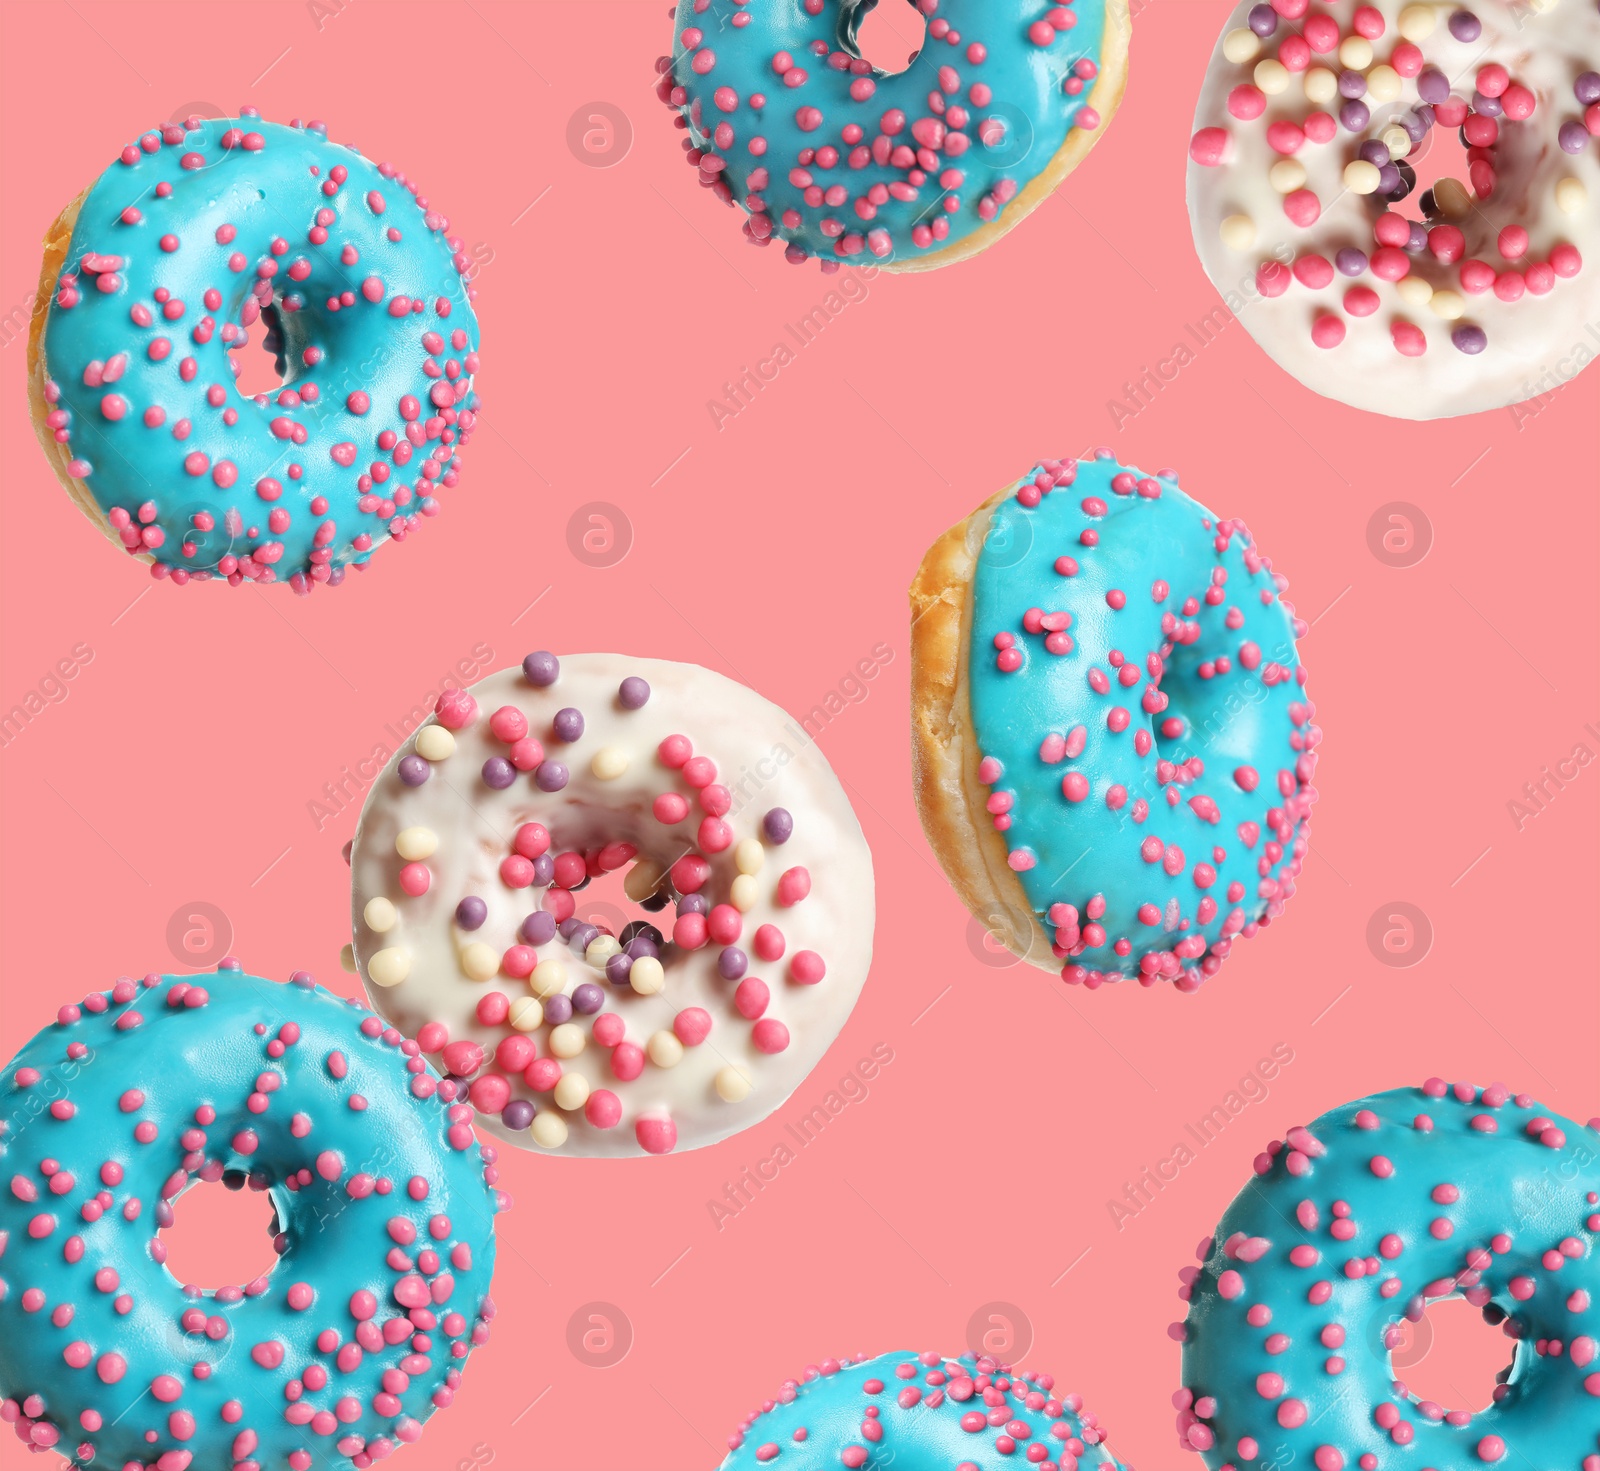 Image of Set of falling delicious donuts on pink background